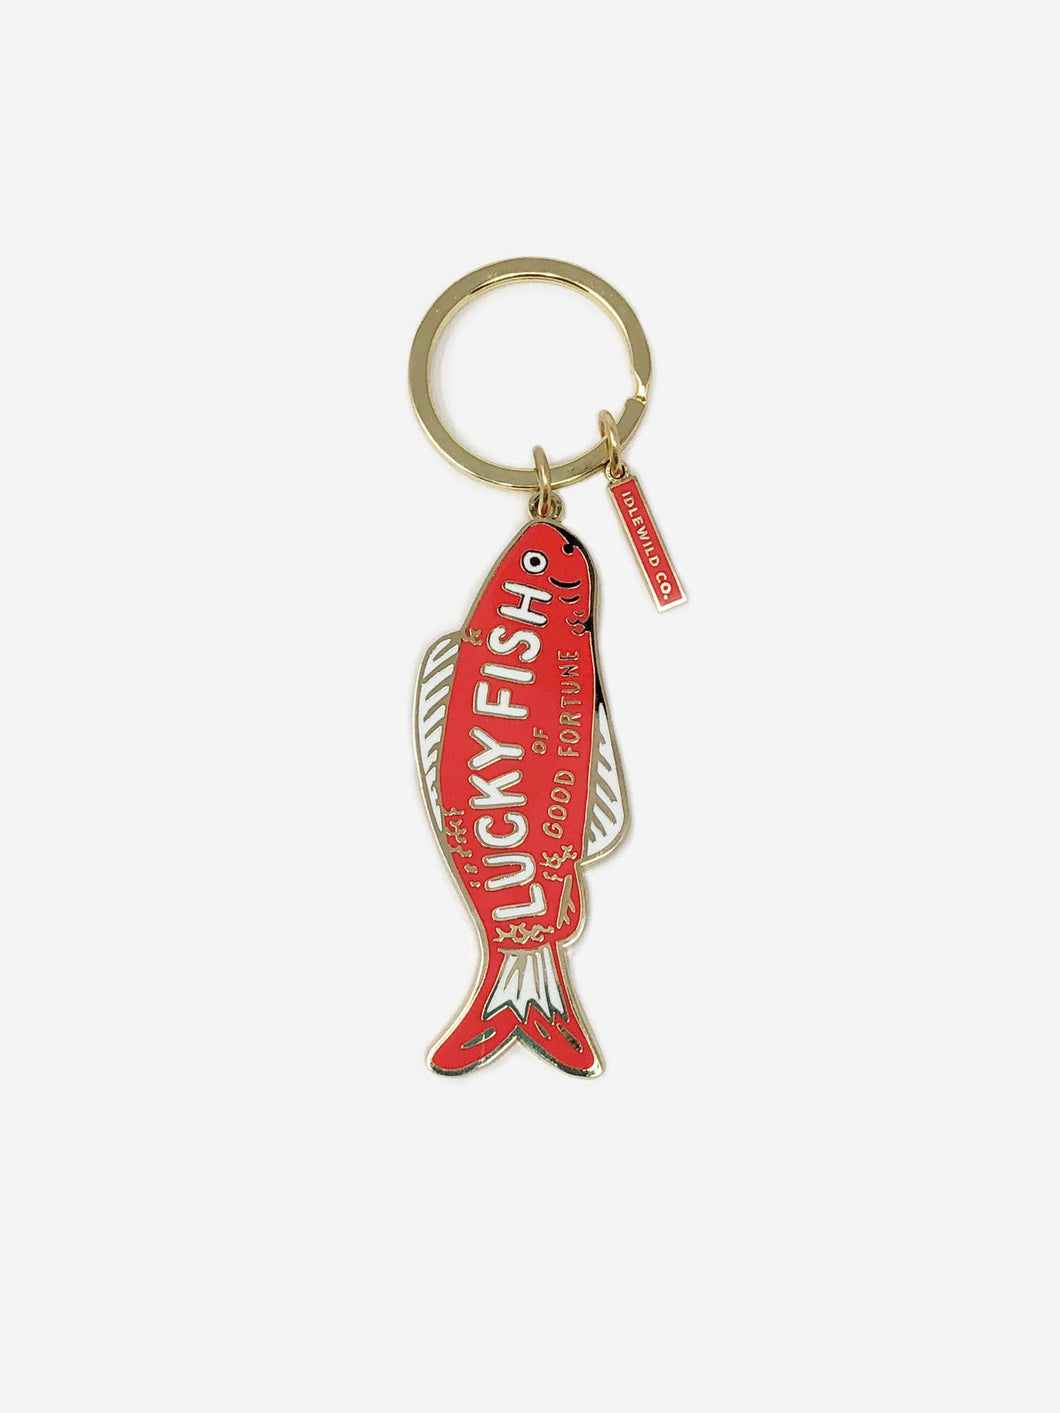 Good Fortune Fish Keychain - UNBOXED!